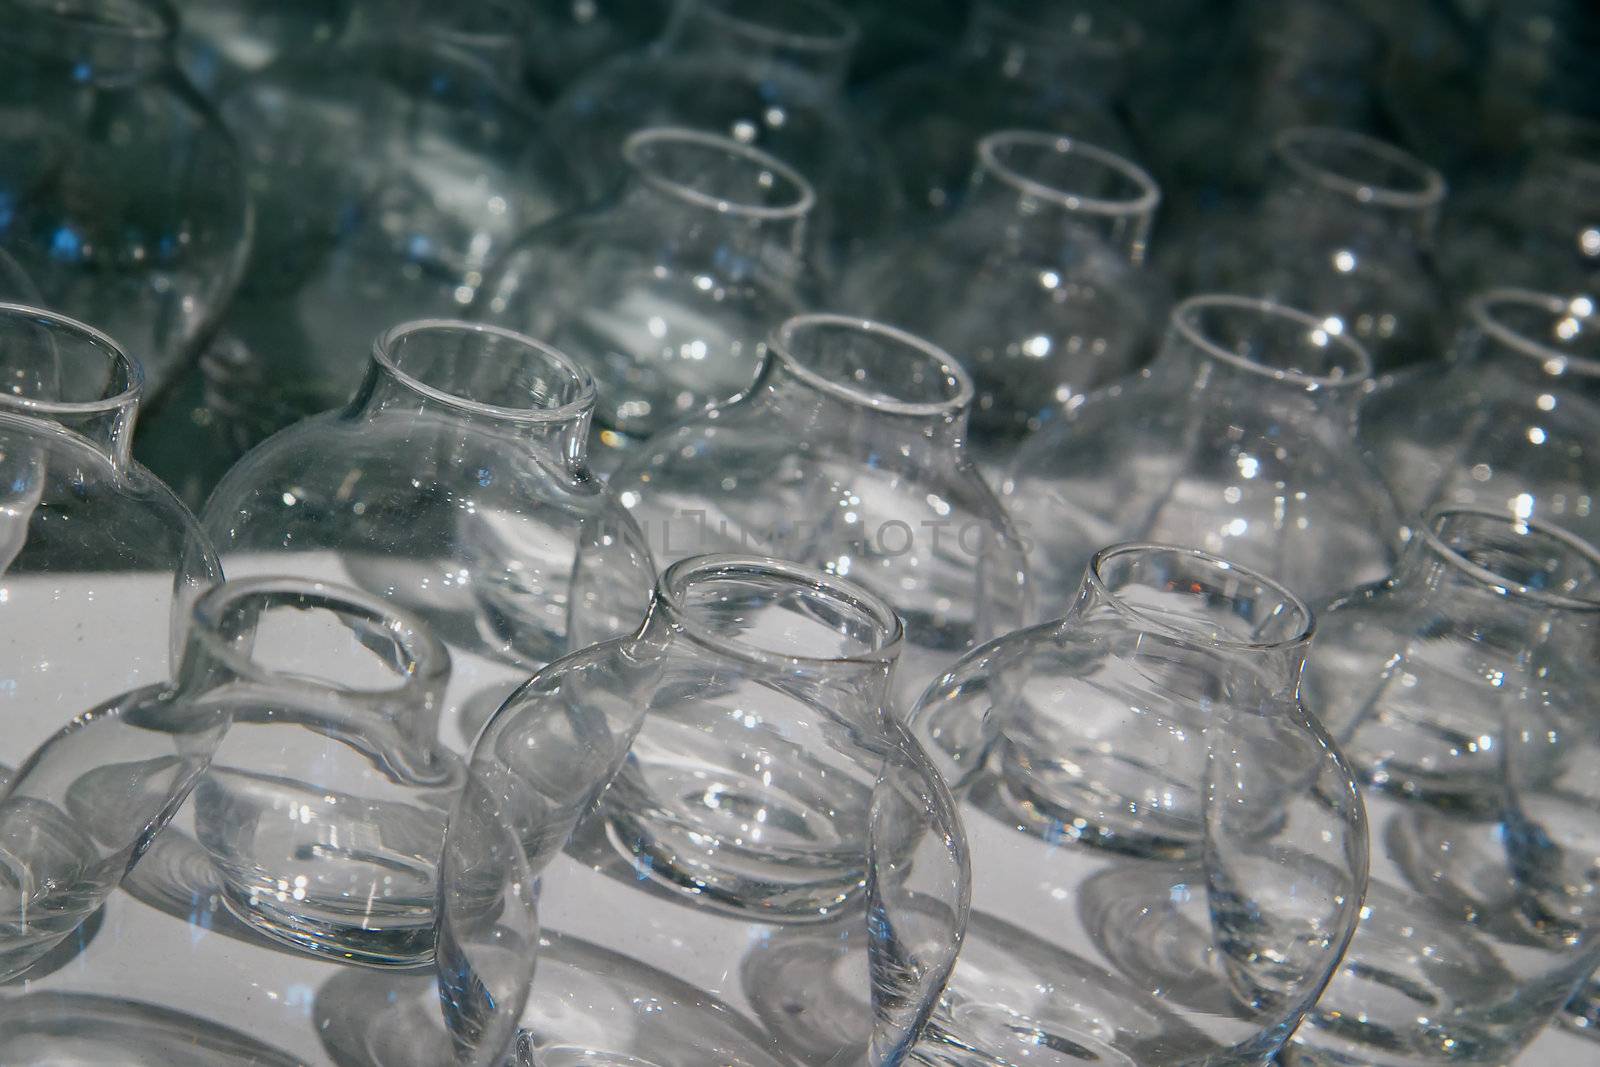 Rows of empty flower vase shaped glass containers